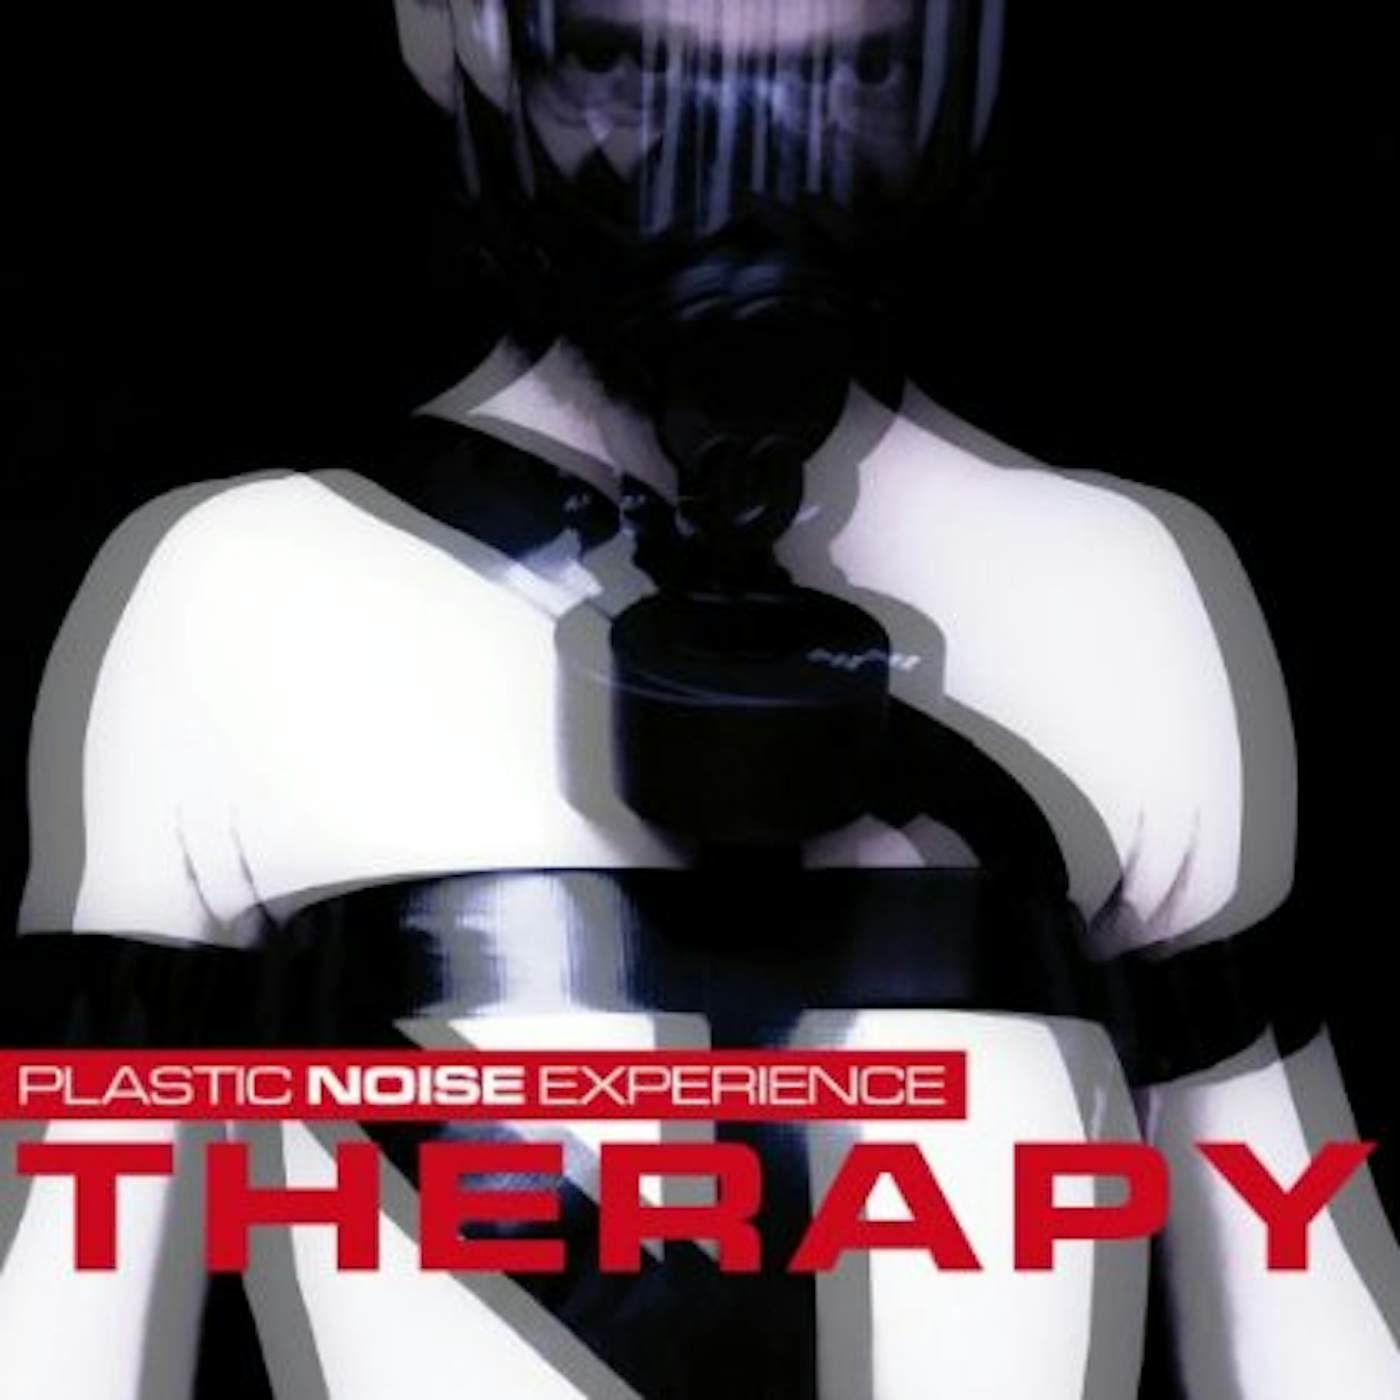 The Plastic Noise Experience THERAPY CD